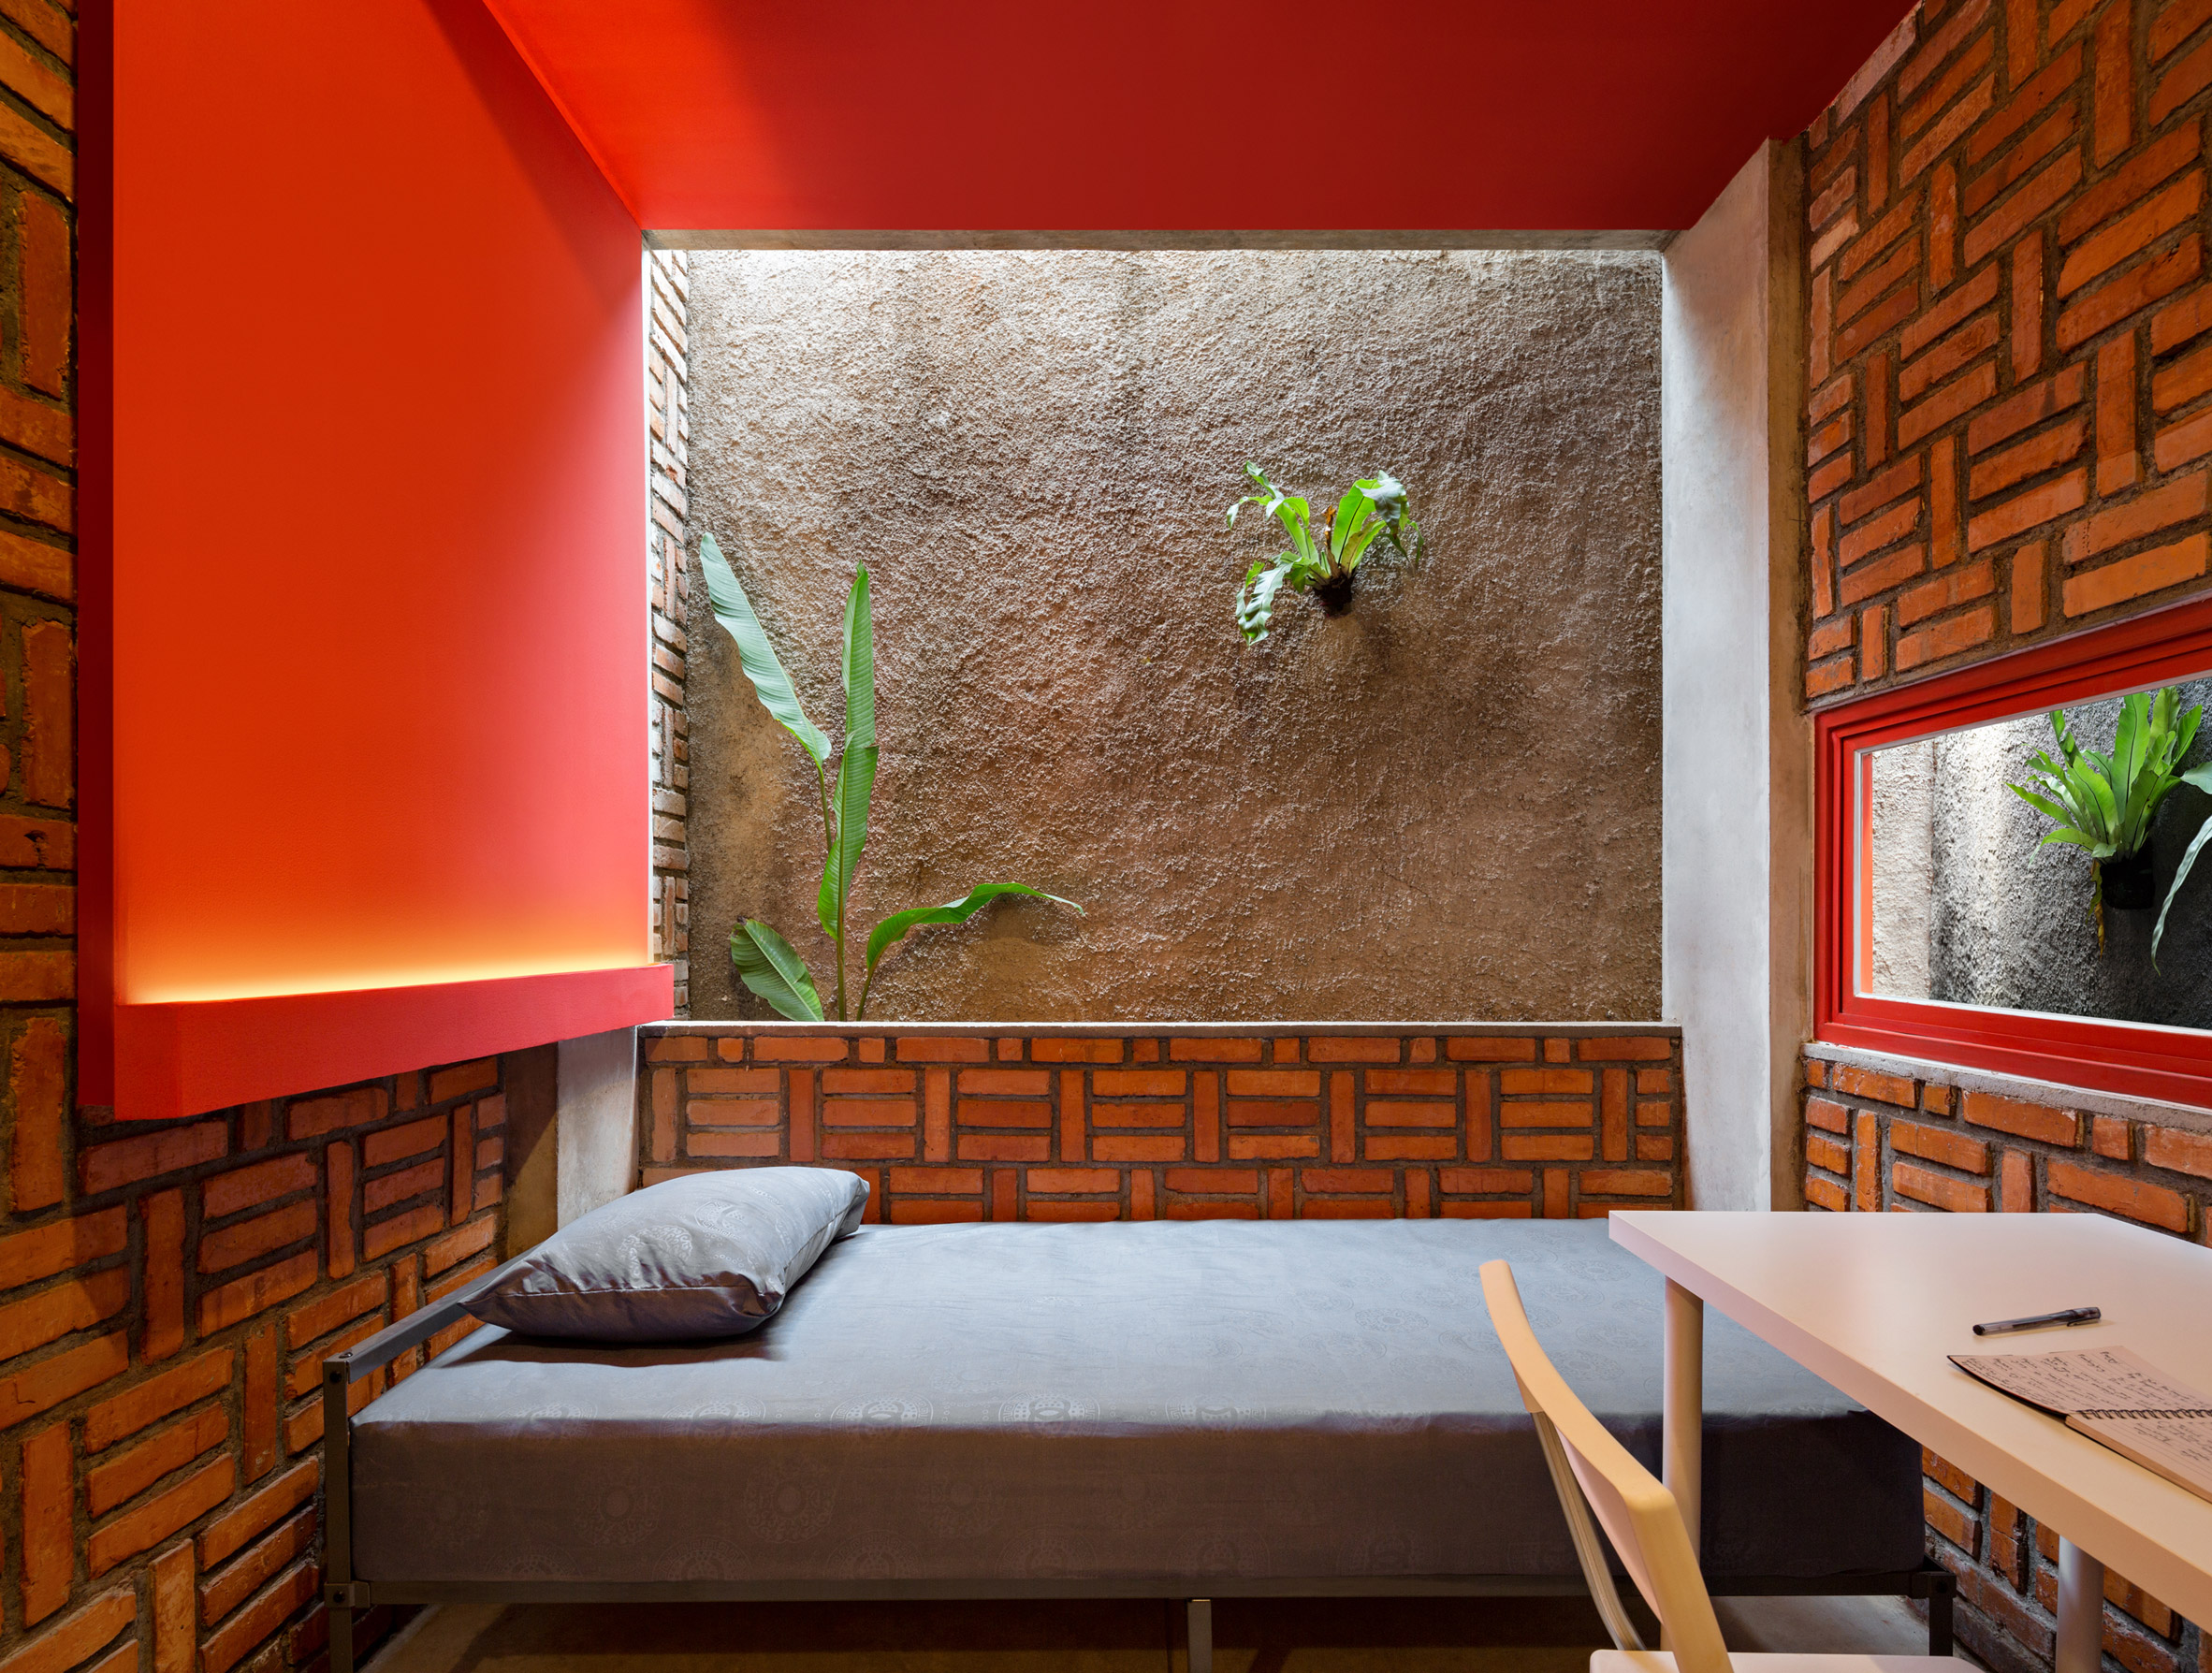 Dormitory room with walls showing a contrast of red paint, brickwork, concrete and greenery